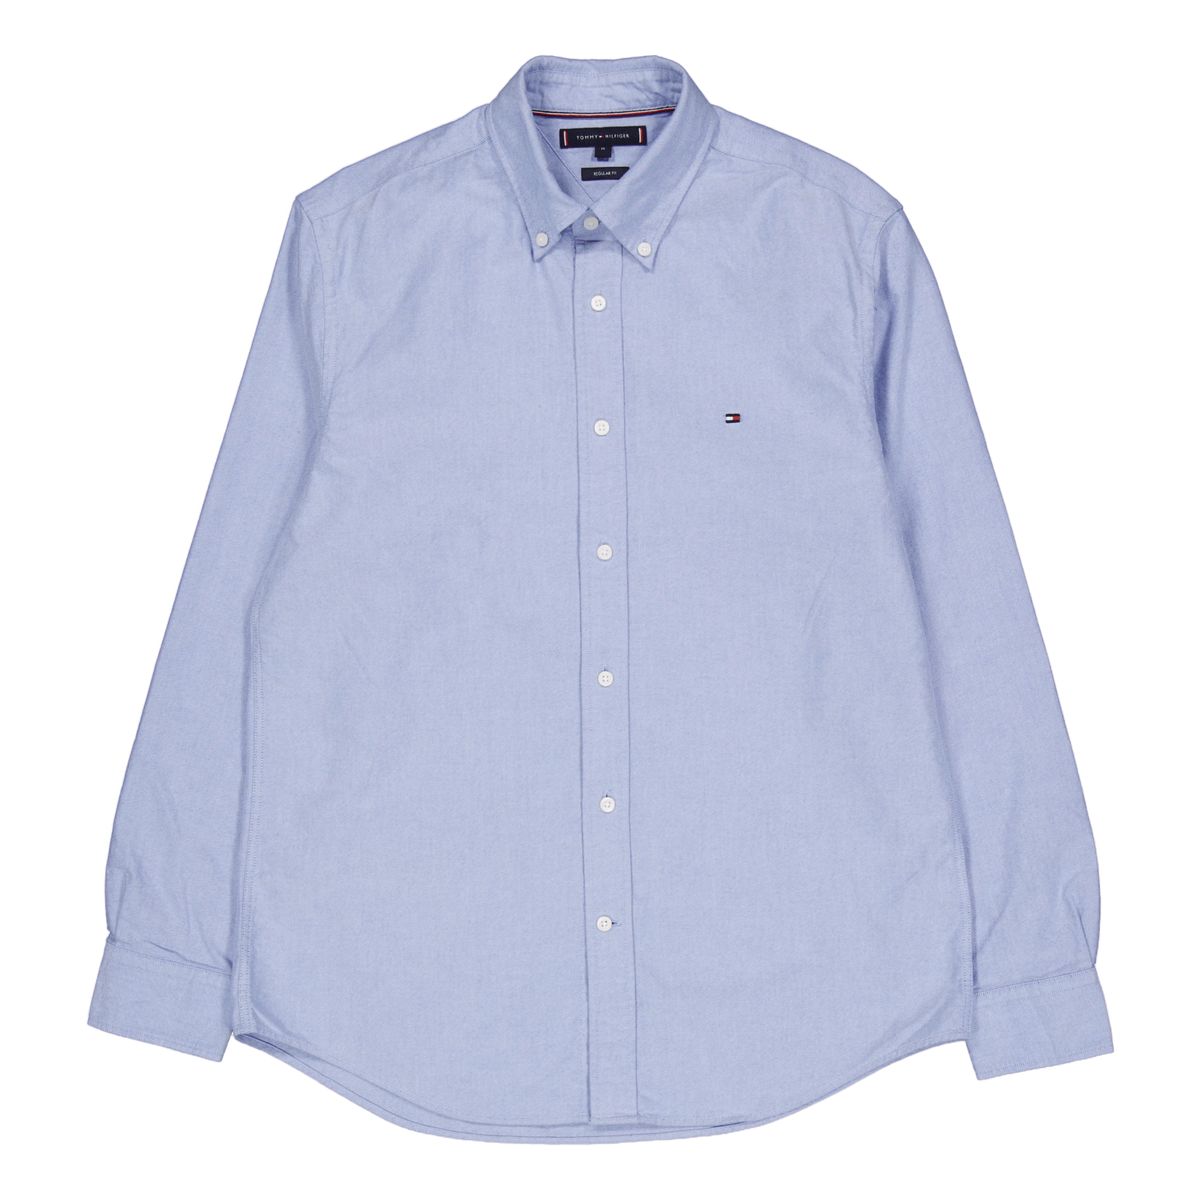 Solid Heritage Oxford Rf Shirt 0gy-shirt Blue